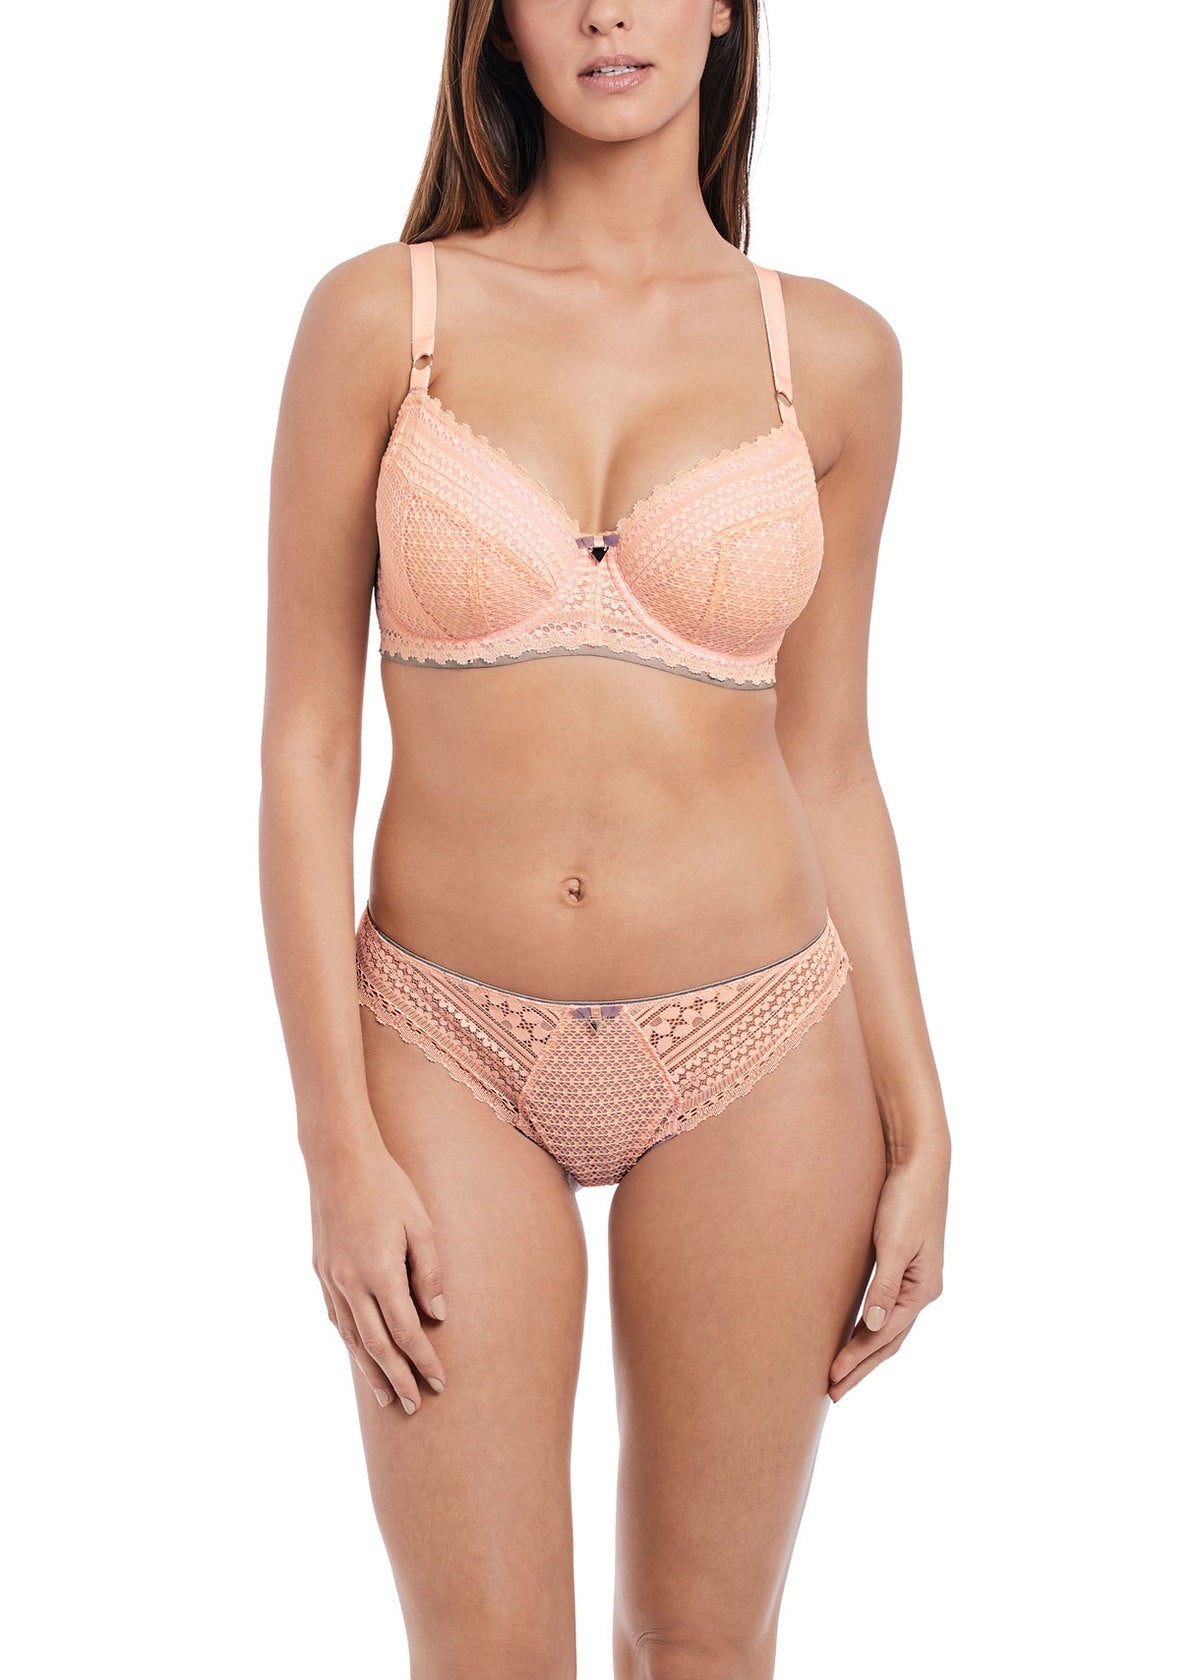 Daisy Lace Padded Half Cup Bra - Blush – Leia Lingerie